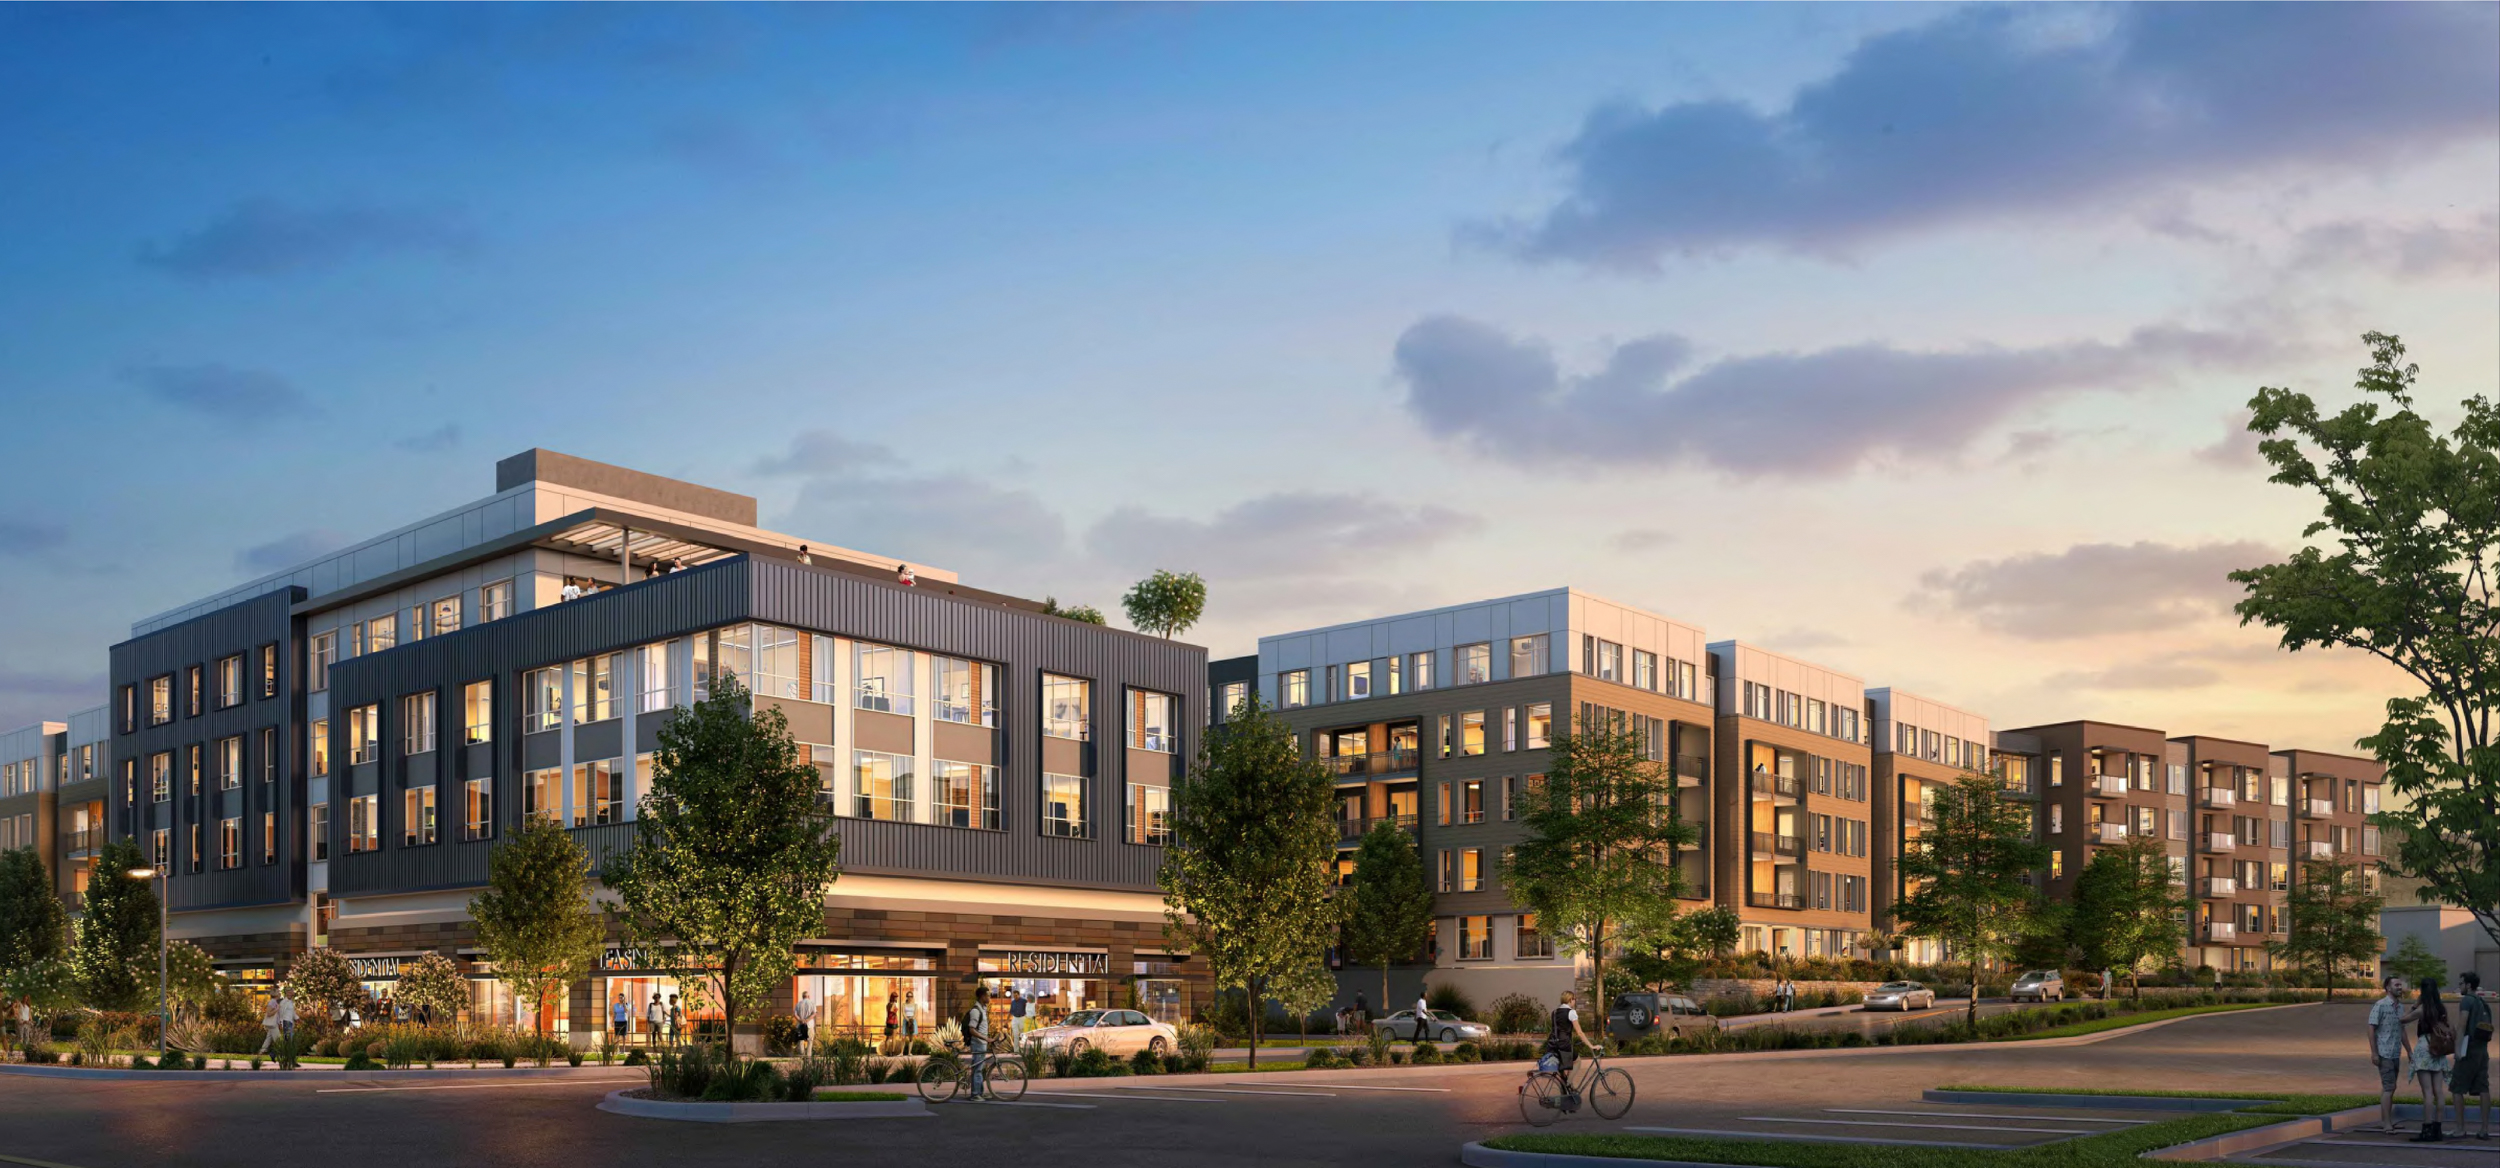 Stoneridge Mall residential project pedestrian view, rendering by KTGY